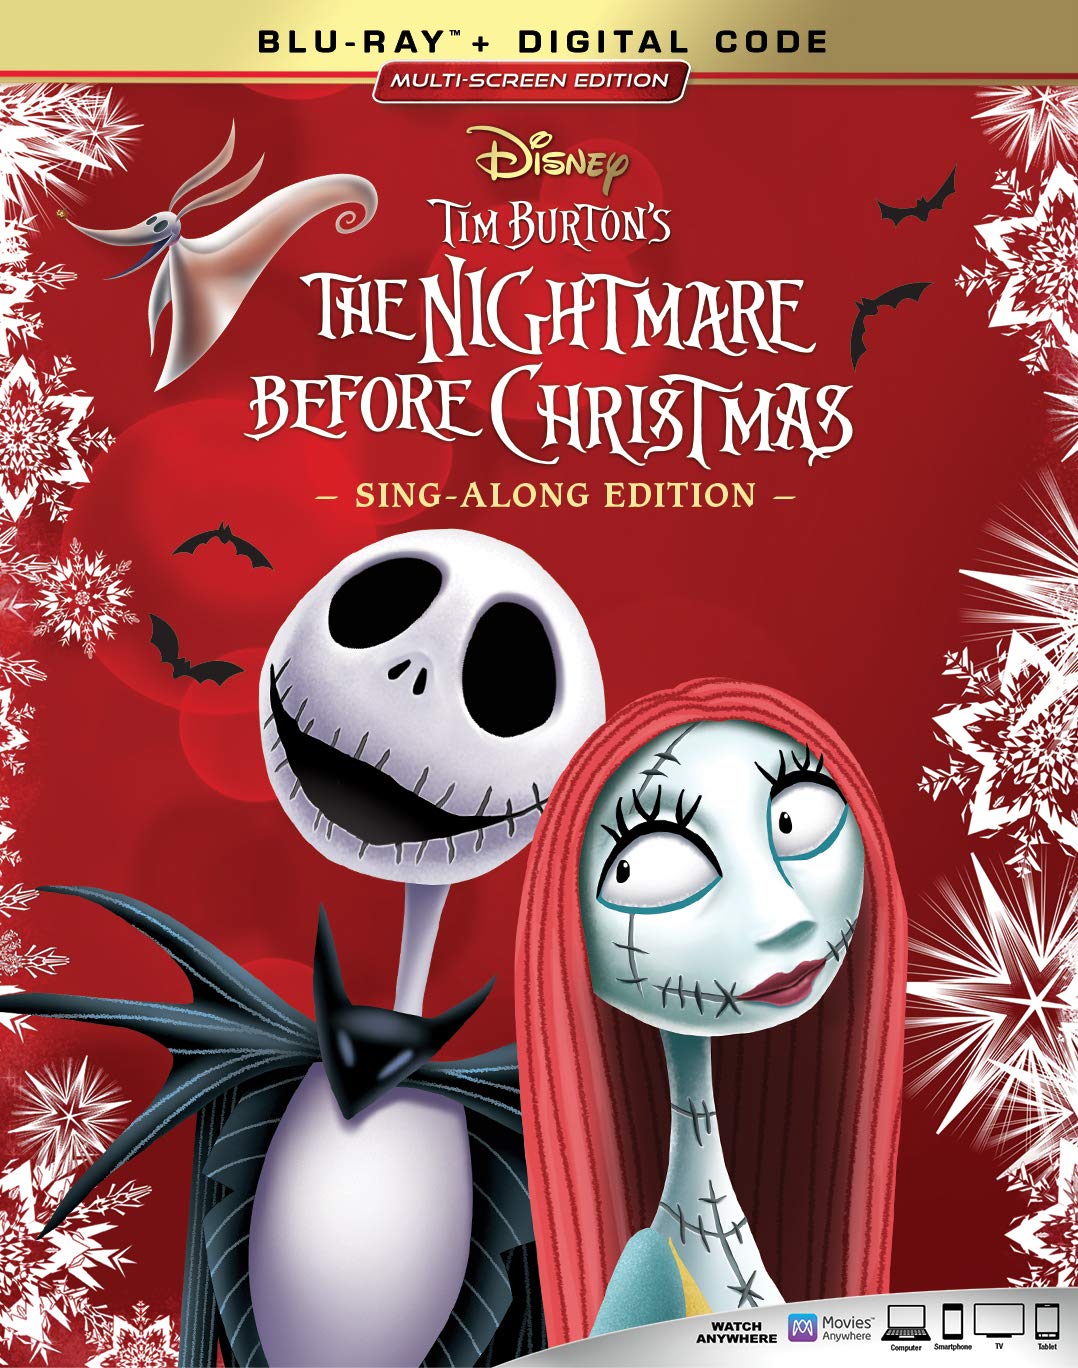 The Nightmare Before Christmas (Sing-Along Edition)